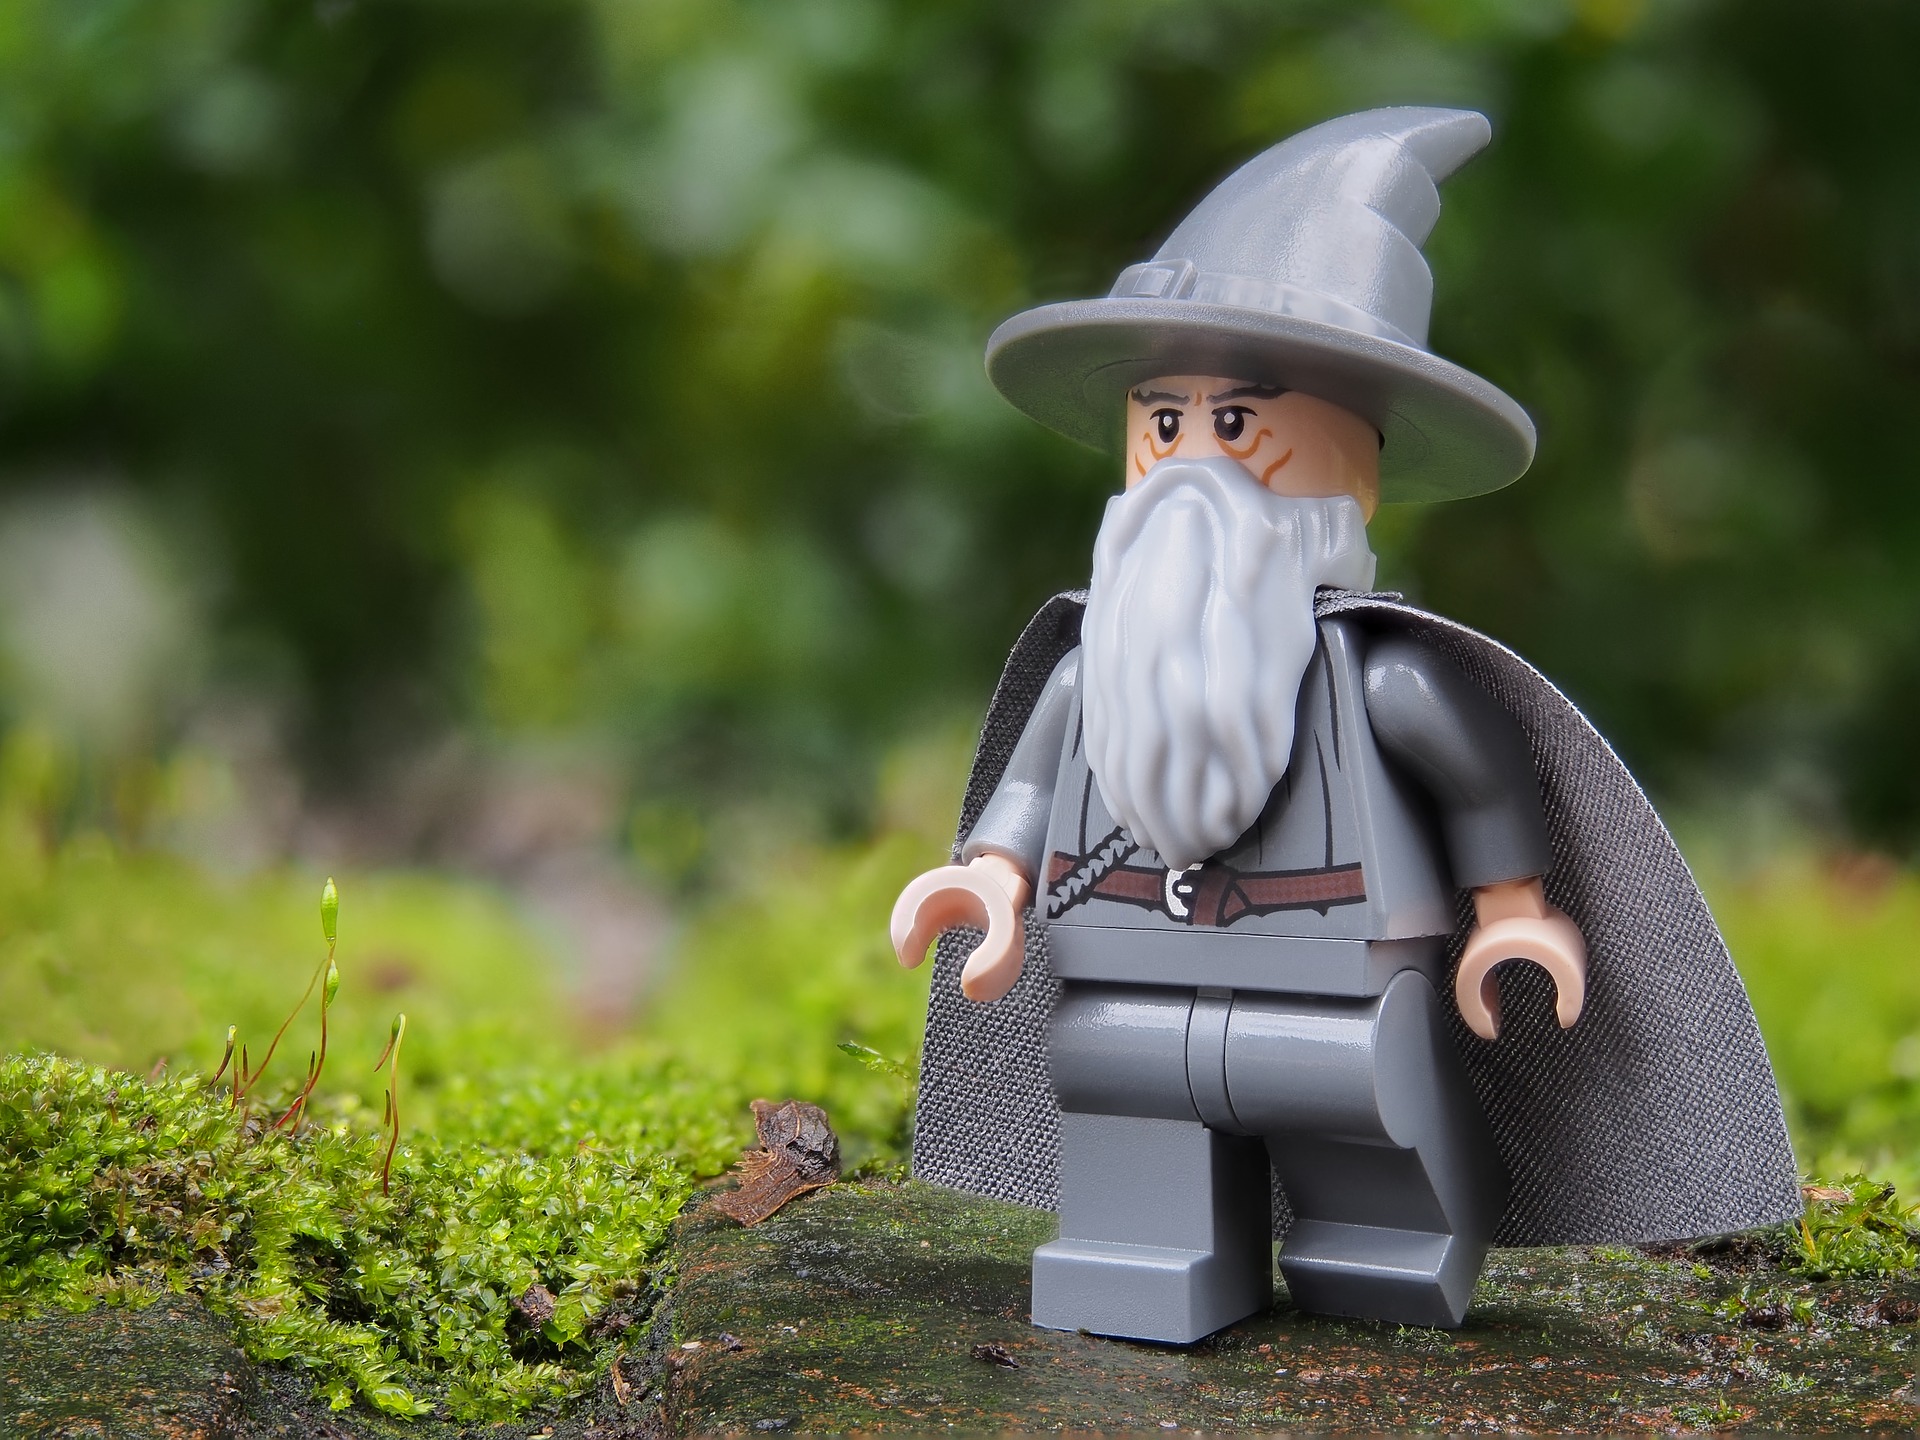 Lego Wizard toy in a grass field